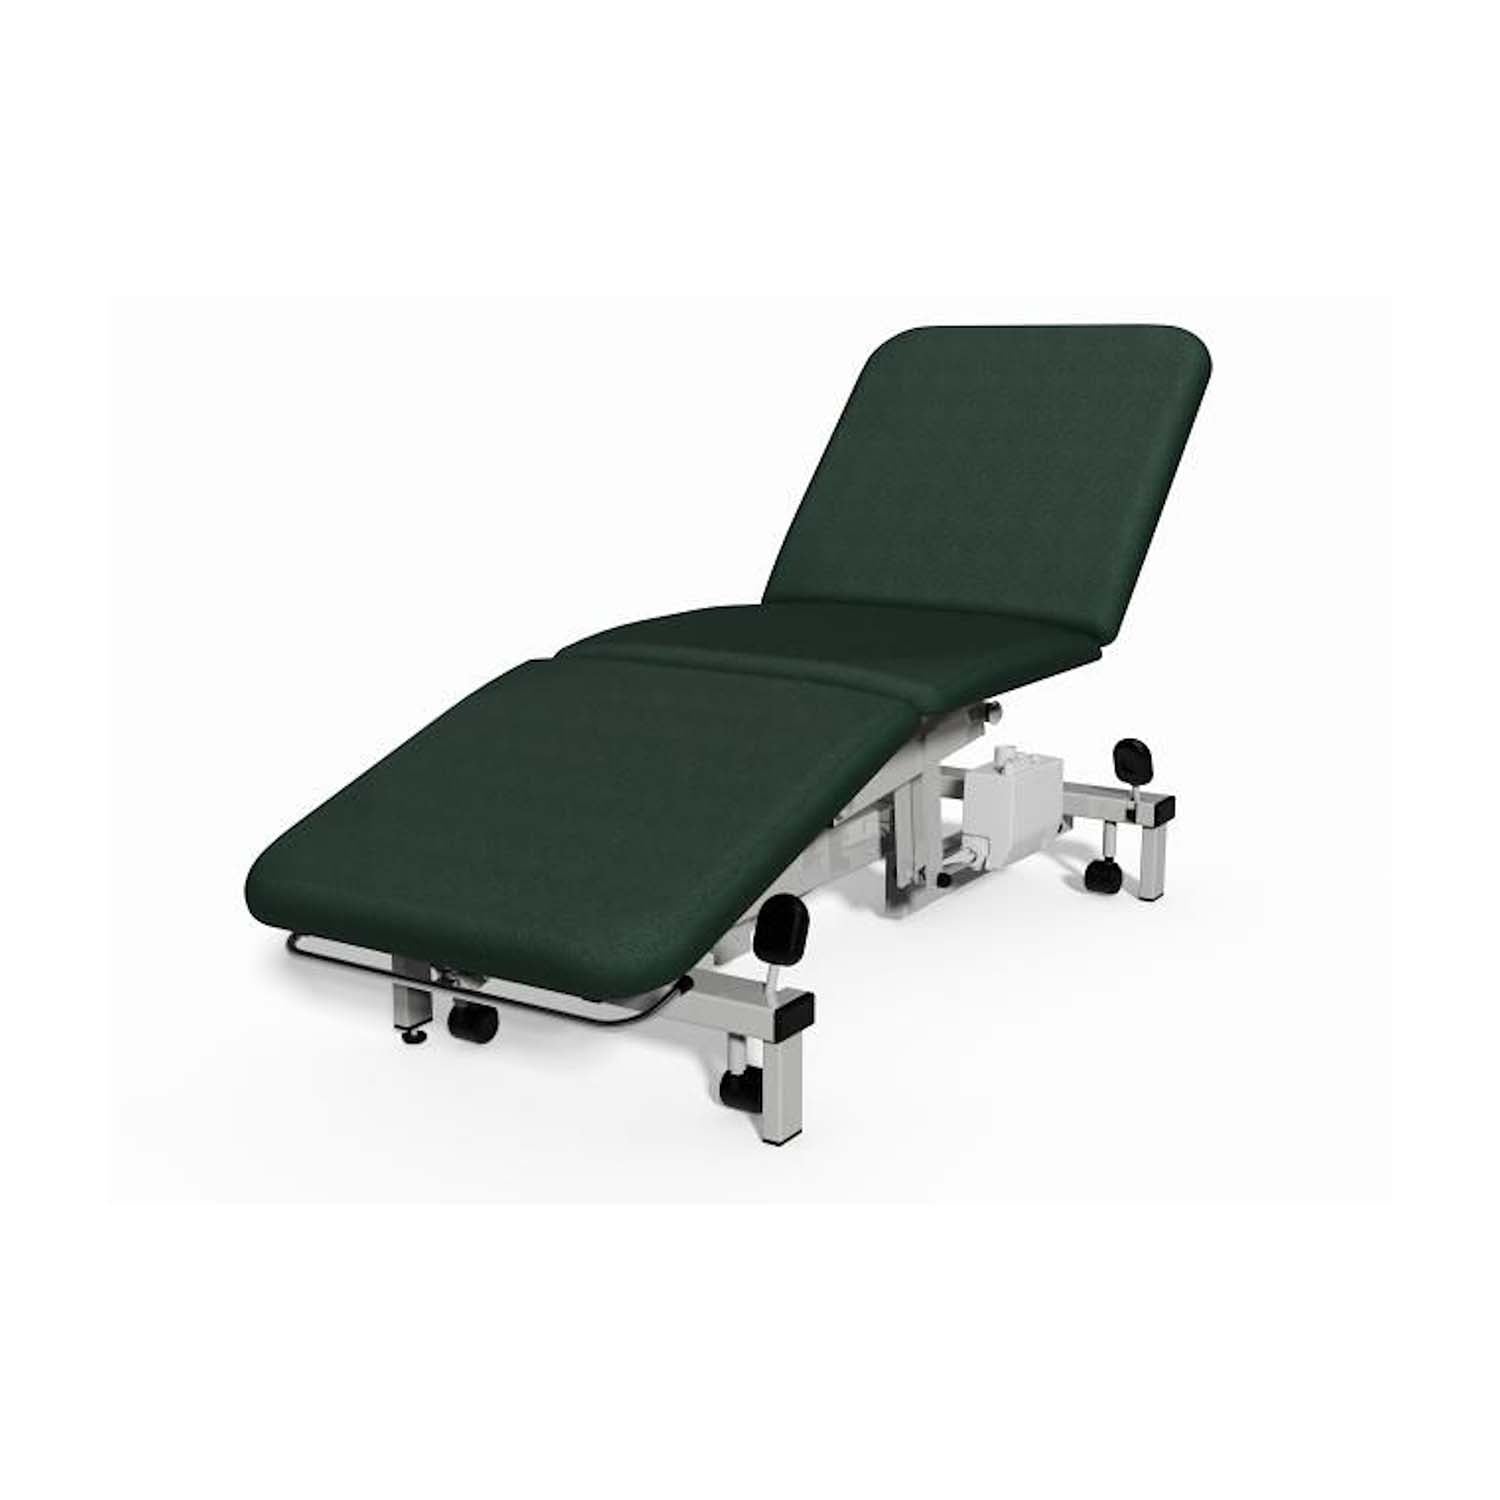 Plinth 2000 Model 503 3 Section Examination Couch | Hydraulic | Rainforest